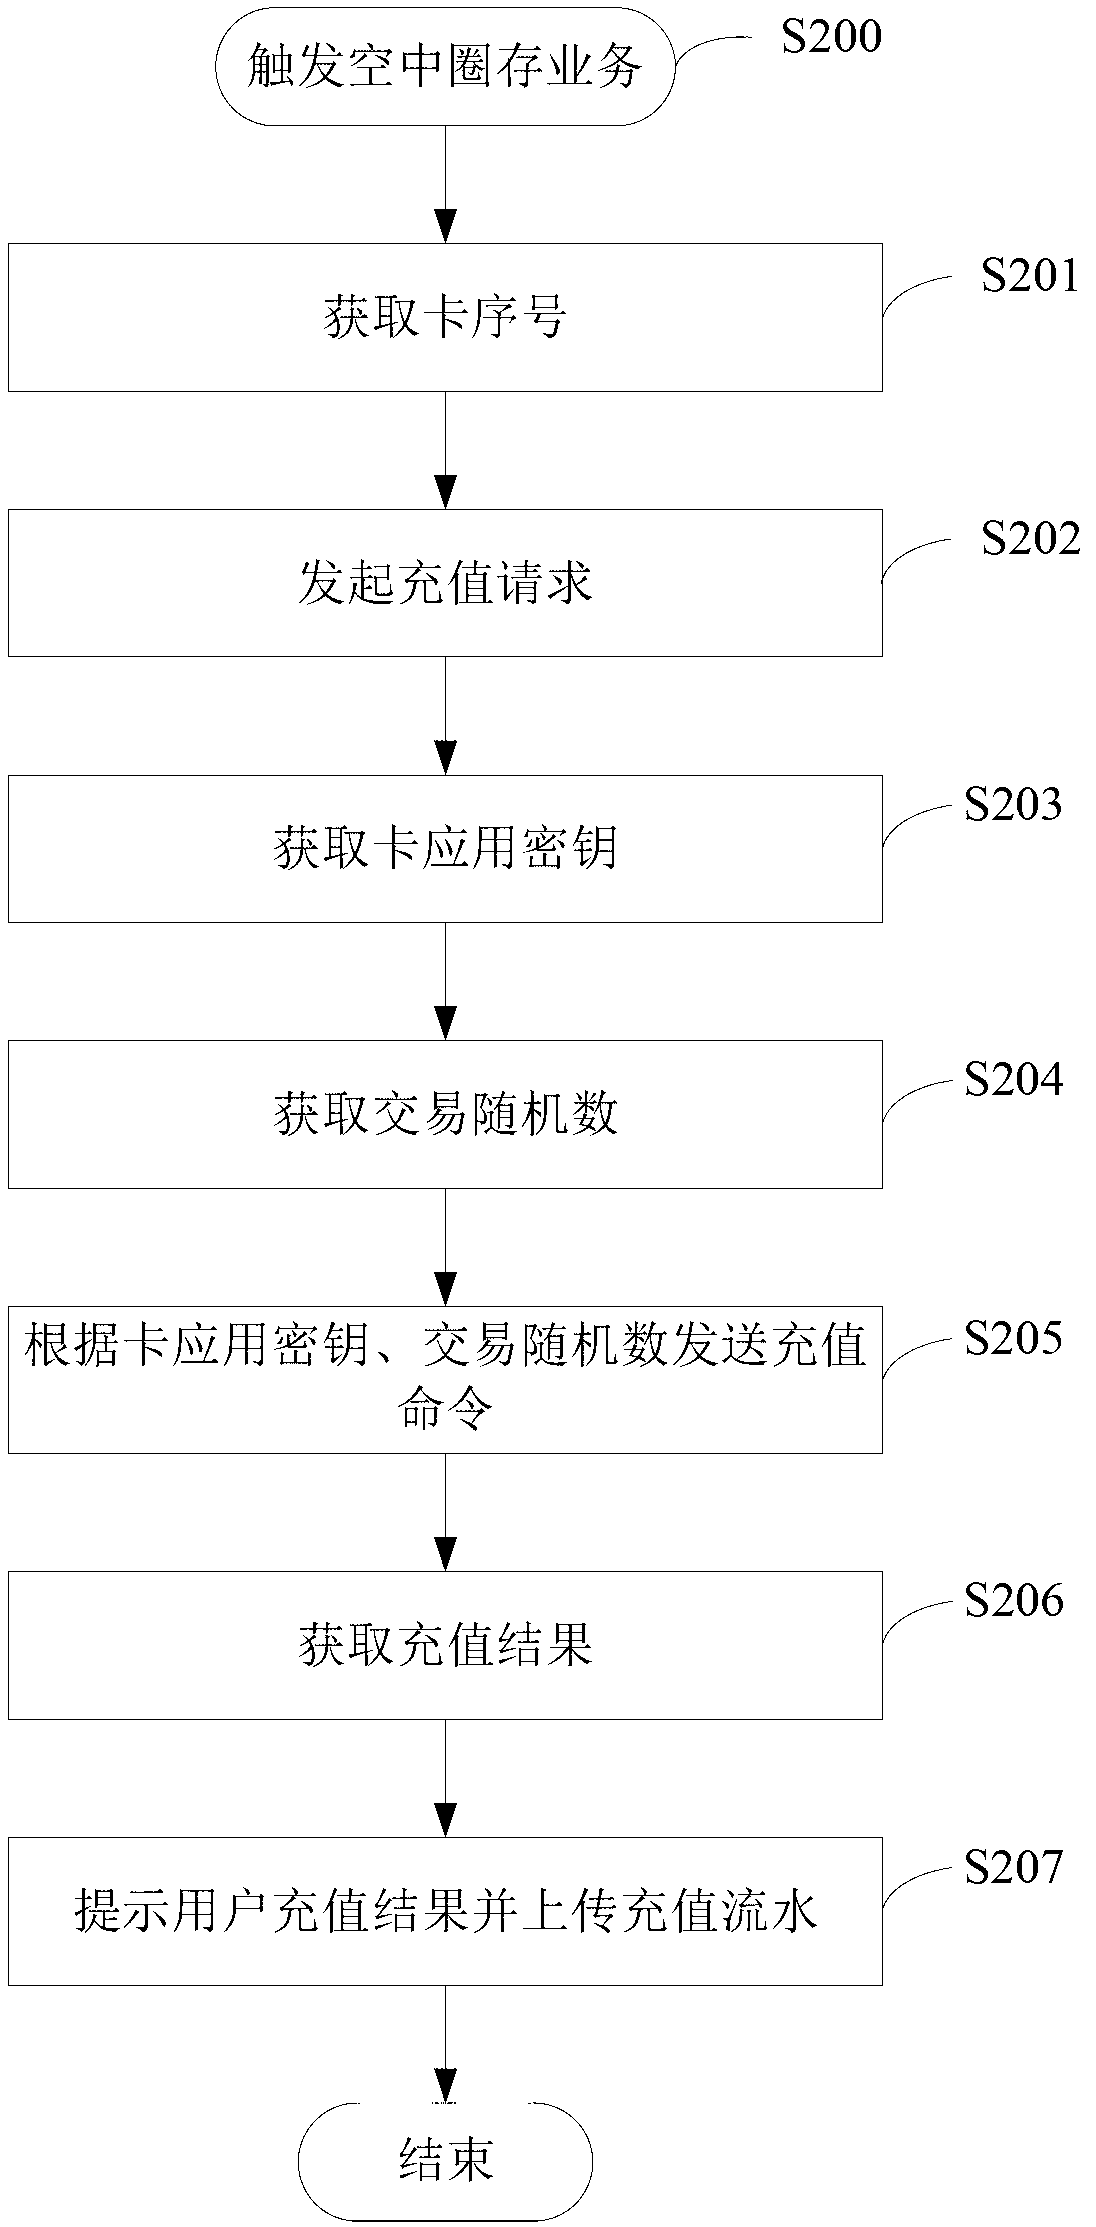 Air business implement method and system based on mobile phone client-side